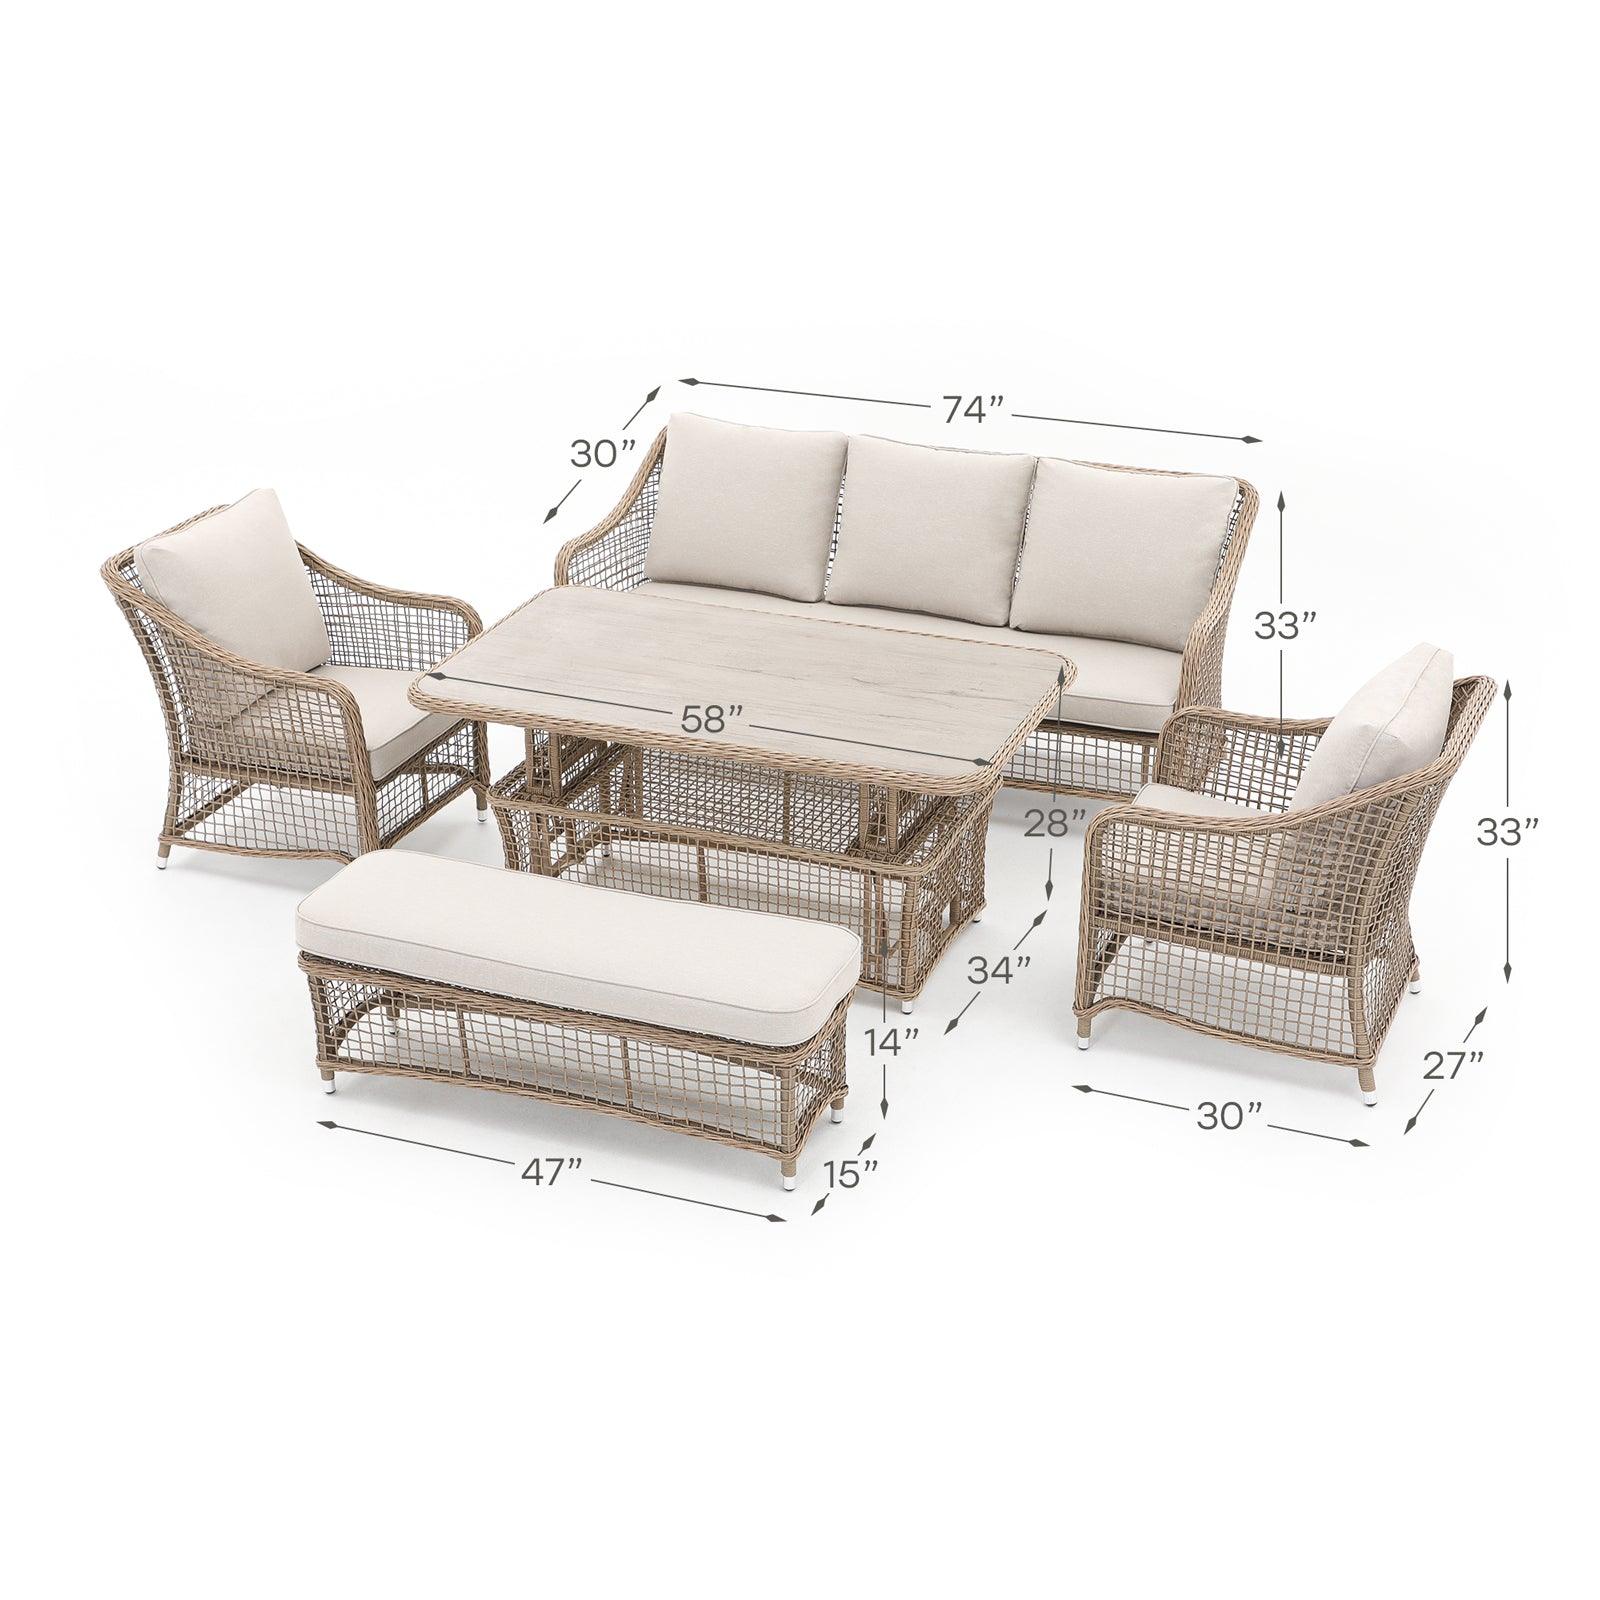 Irati 5-Piece natural color wicker outdoor seating set with aluminum frame, Creamy-white cushions, 1 three-seater sofa, 2 armchairs, 1 bench, 1 lift top dining table, dimension information- Jardina Furniture#color_Natural